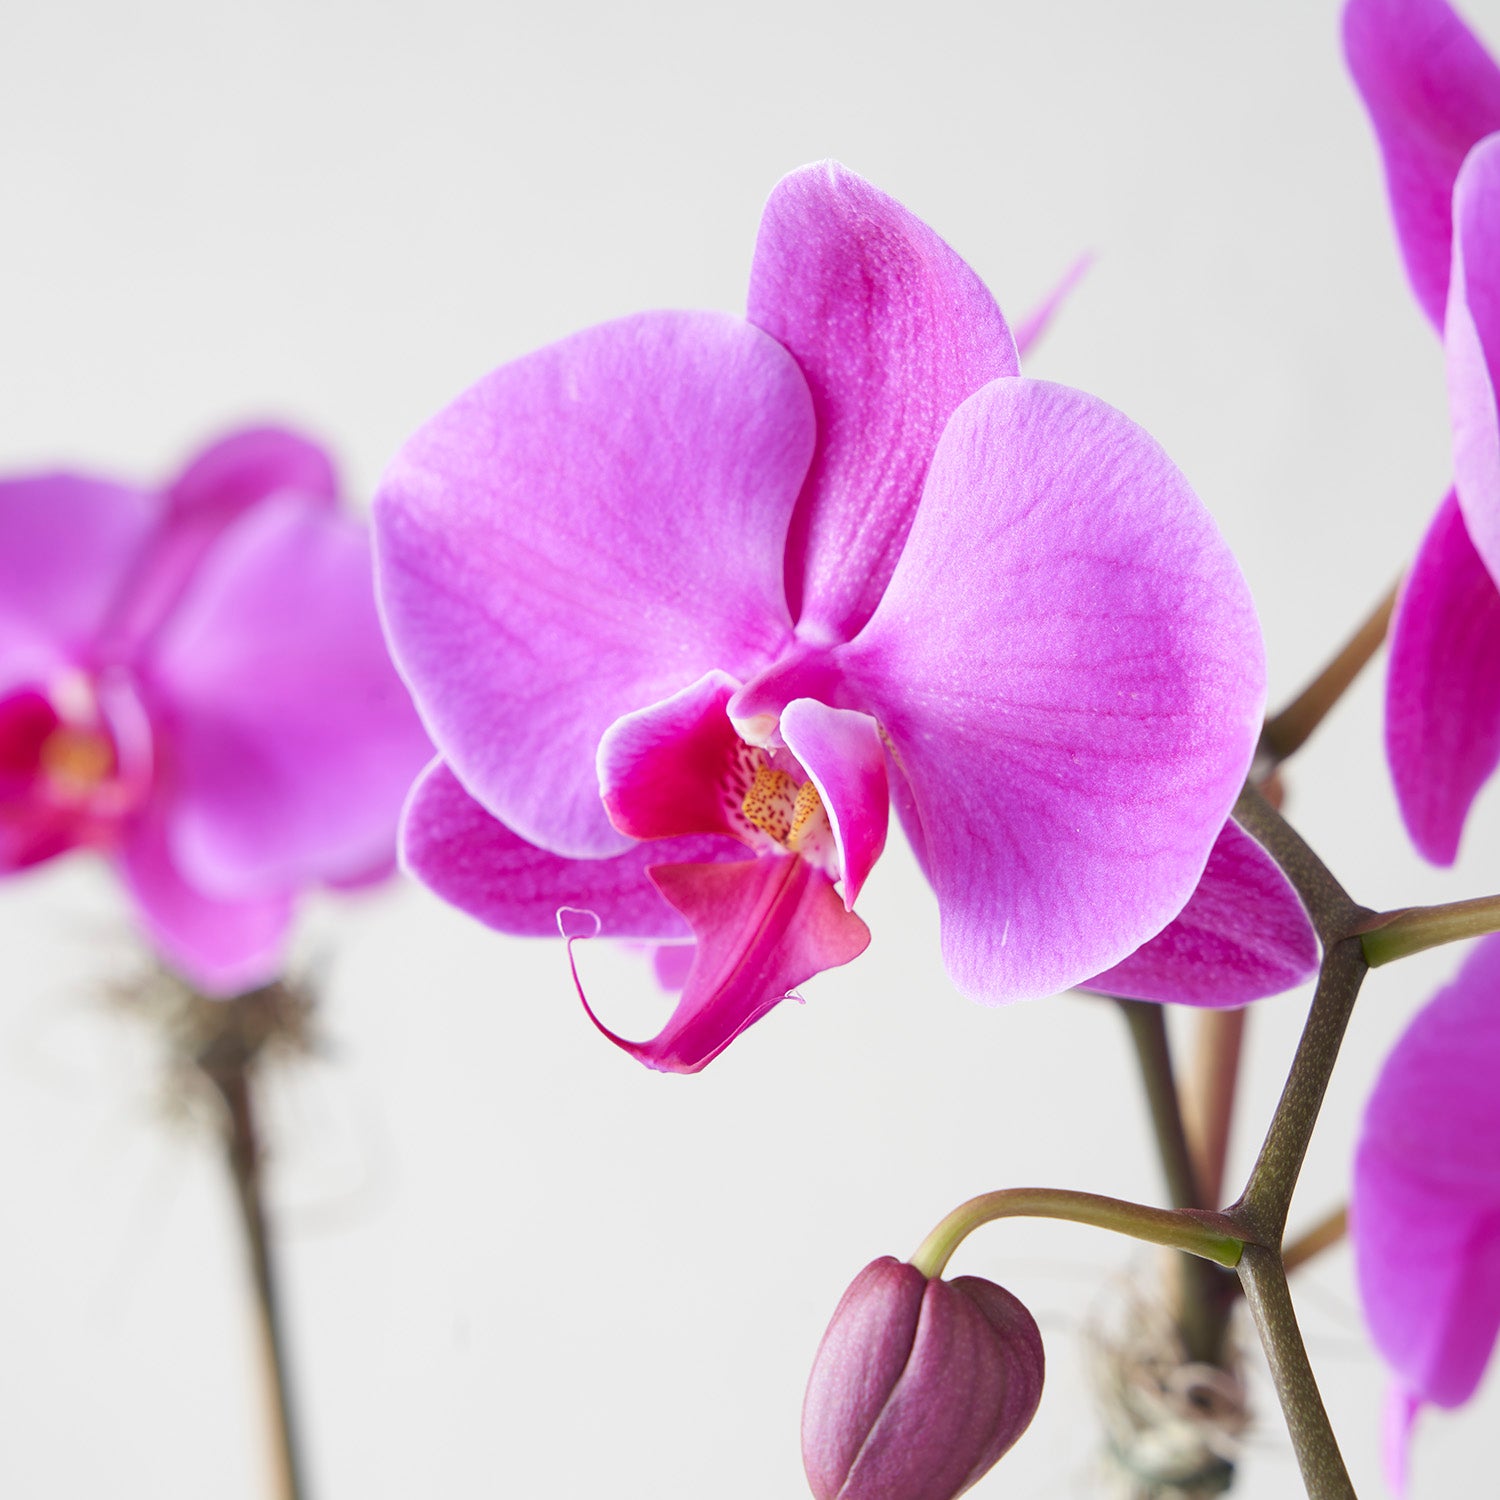 closeup of fuchsia pink phalaenopsis orchid flower on white background.